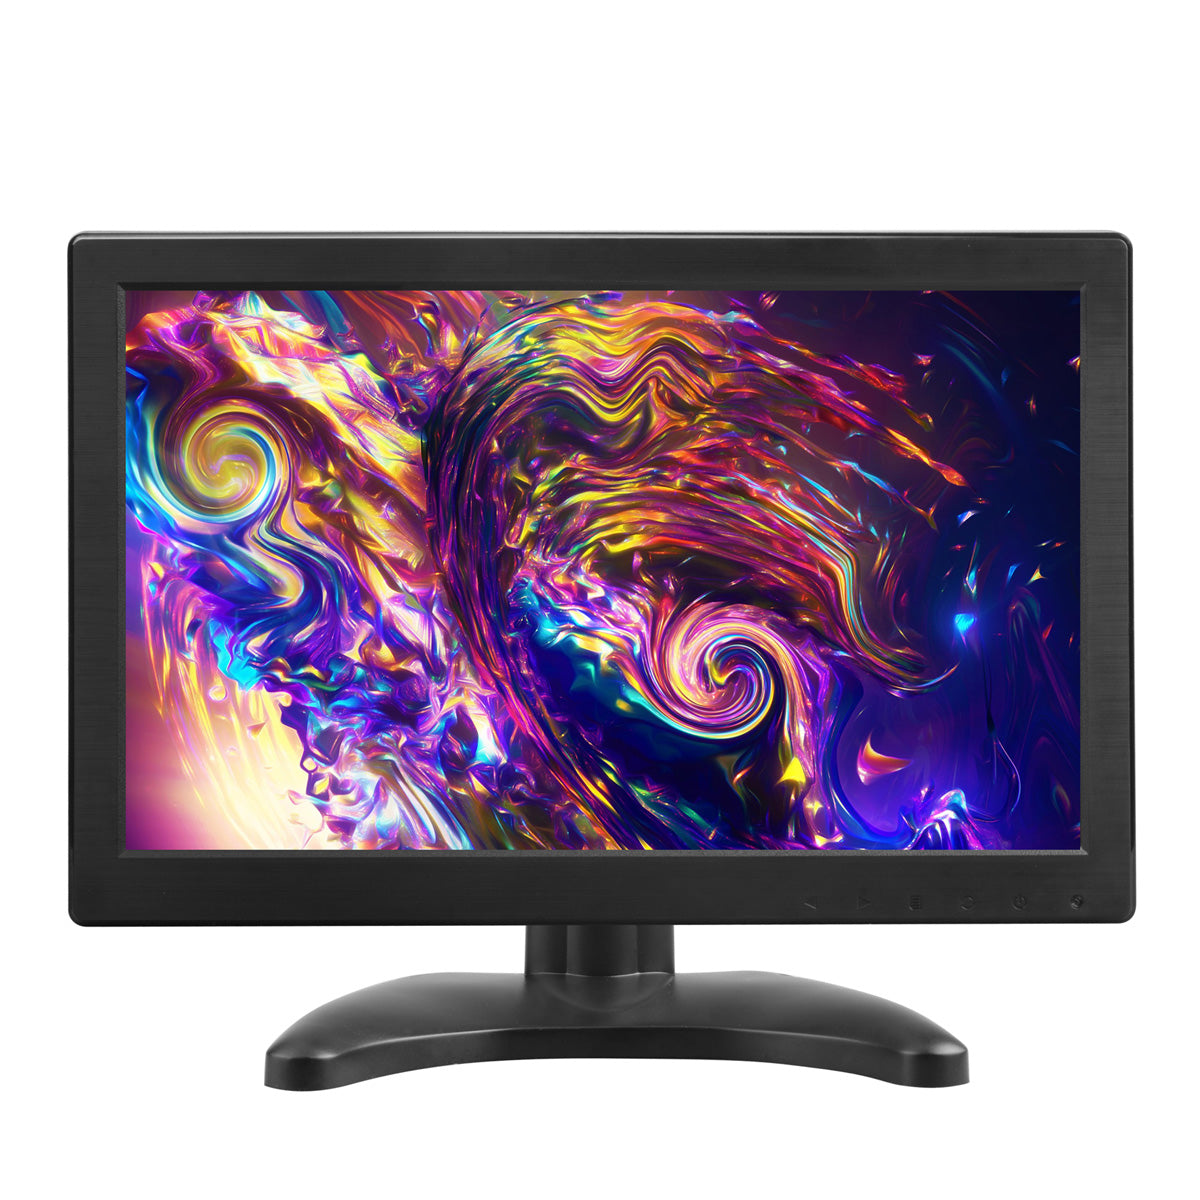 Campark D126 12" 1366x768 HDMI Monitors, LCD Display w/Speaker, HDMI/VGA/AV Port for PC/Security/CCTV System/Raspberry Pi（Only Available In Europe）